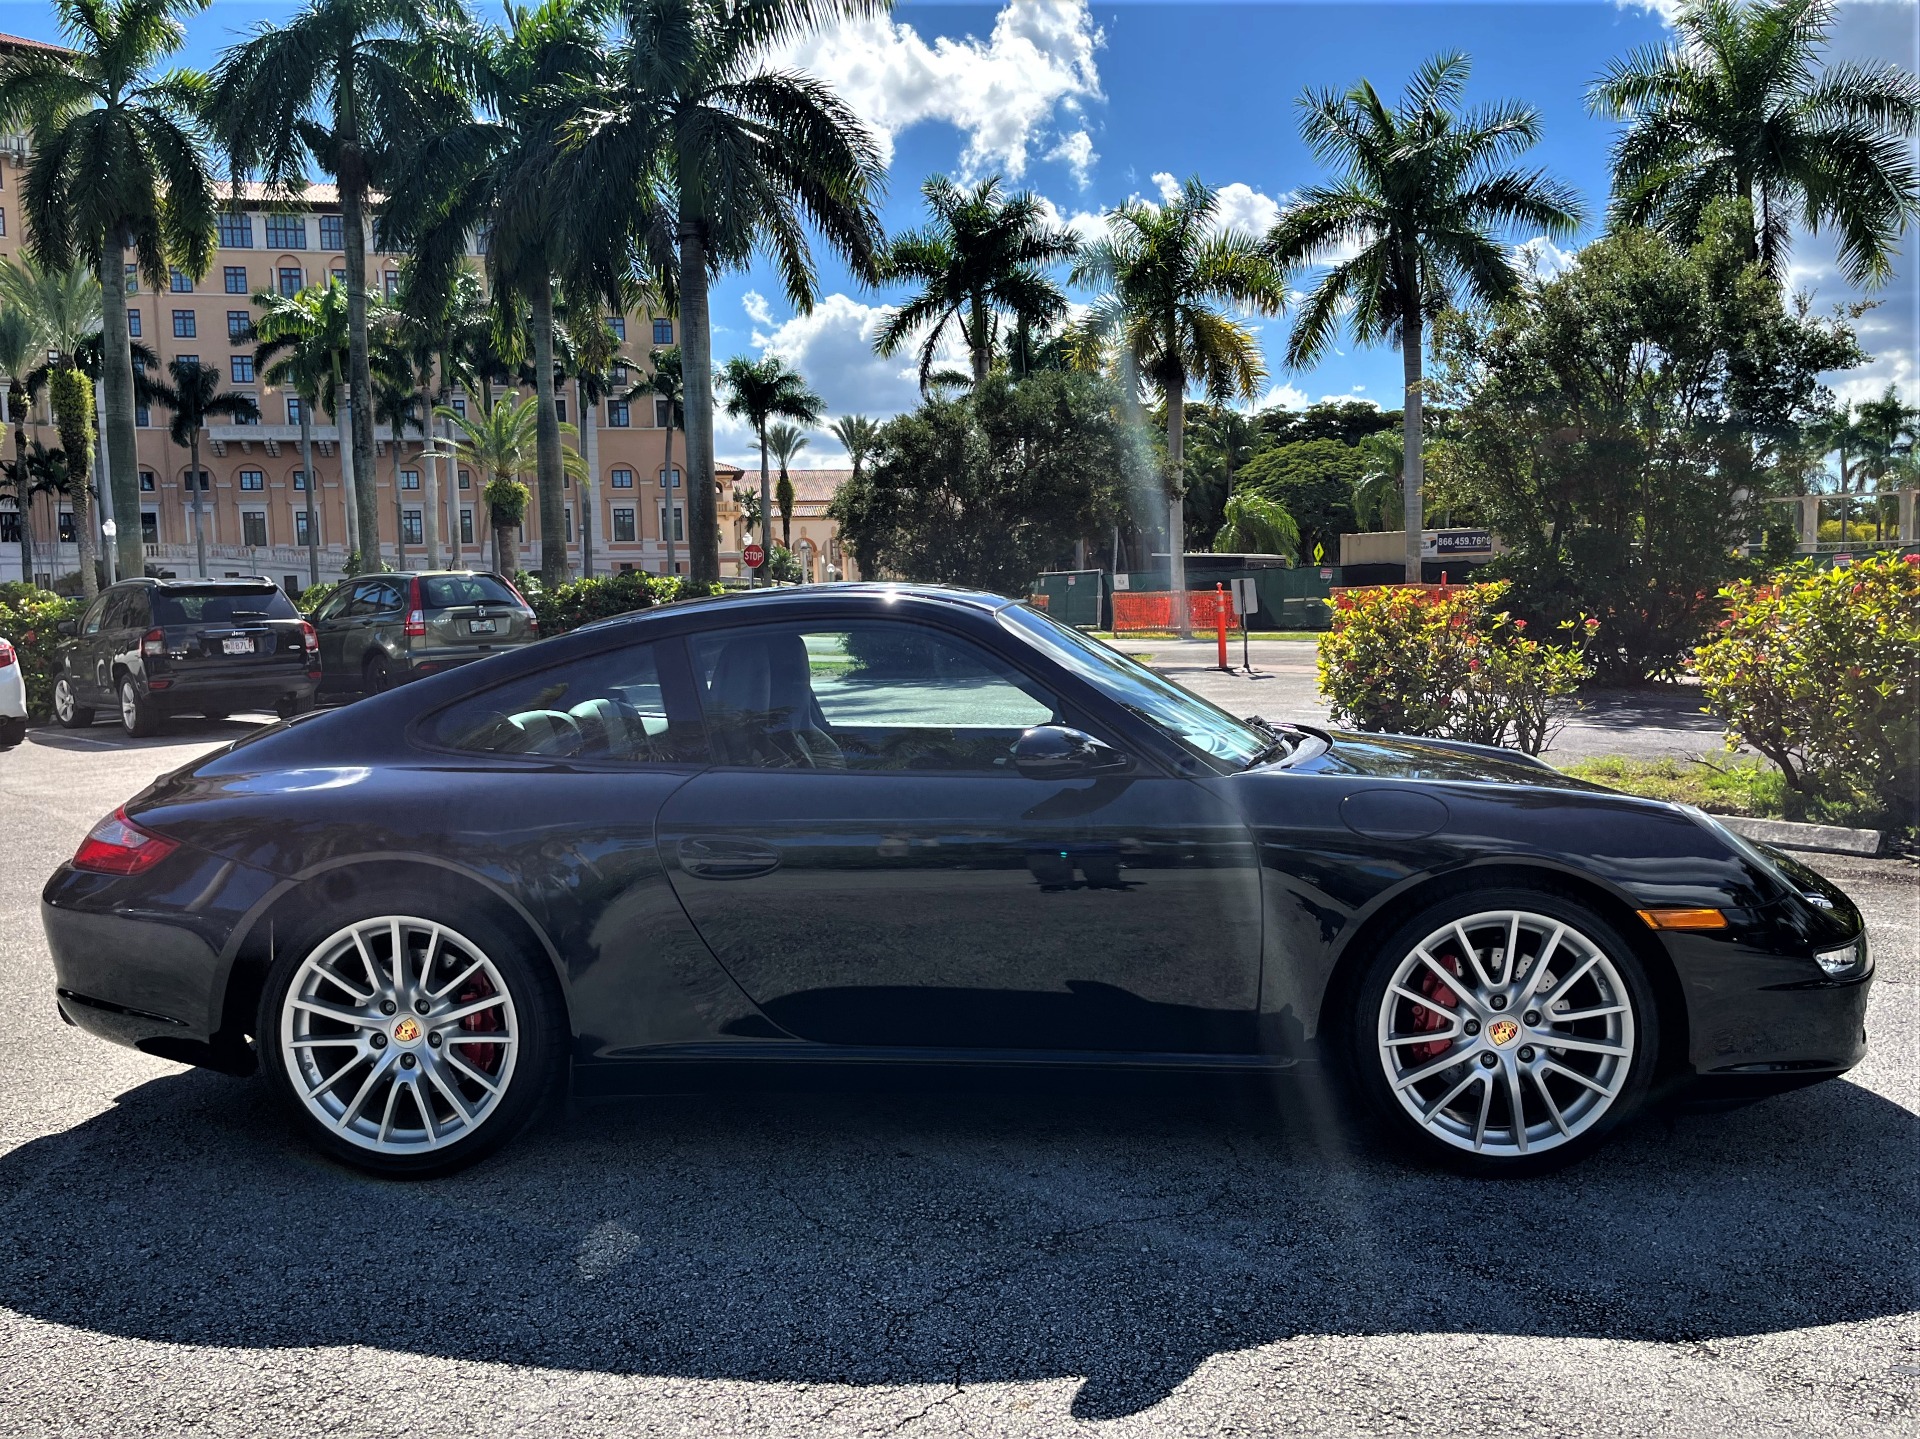 Used 2007 Porsche 911 Carrera S for sale Sold at The Gables Sports Cars in Miami FL 33146 2